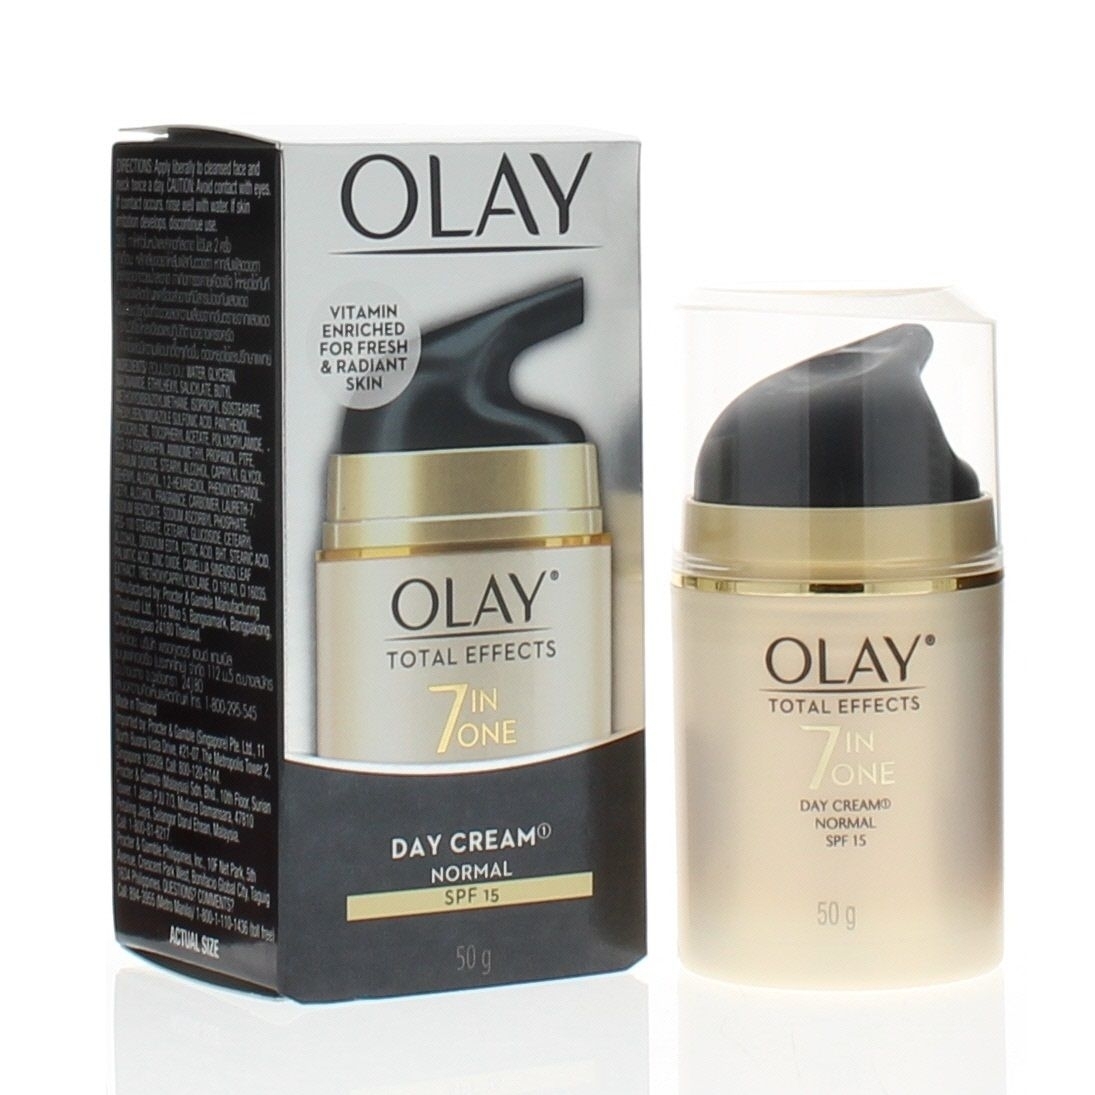 Olay Total Effects 7 In One Day Cream Normal SPF 15 50g/1.7oz